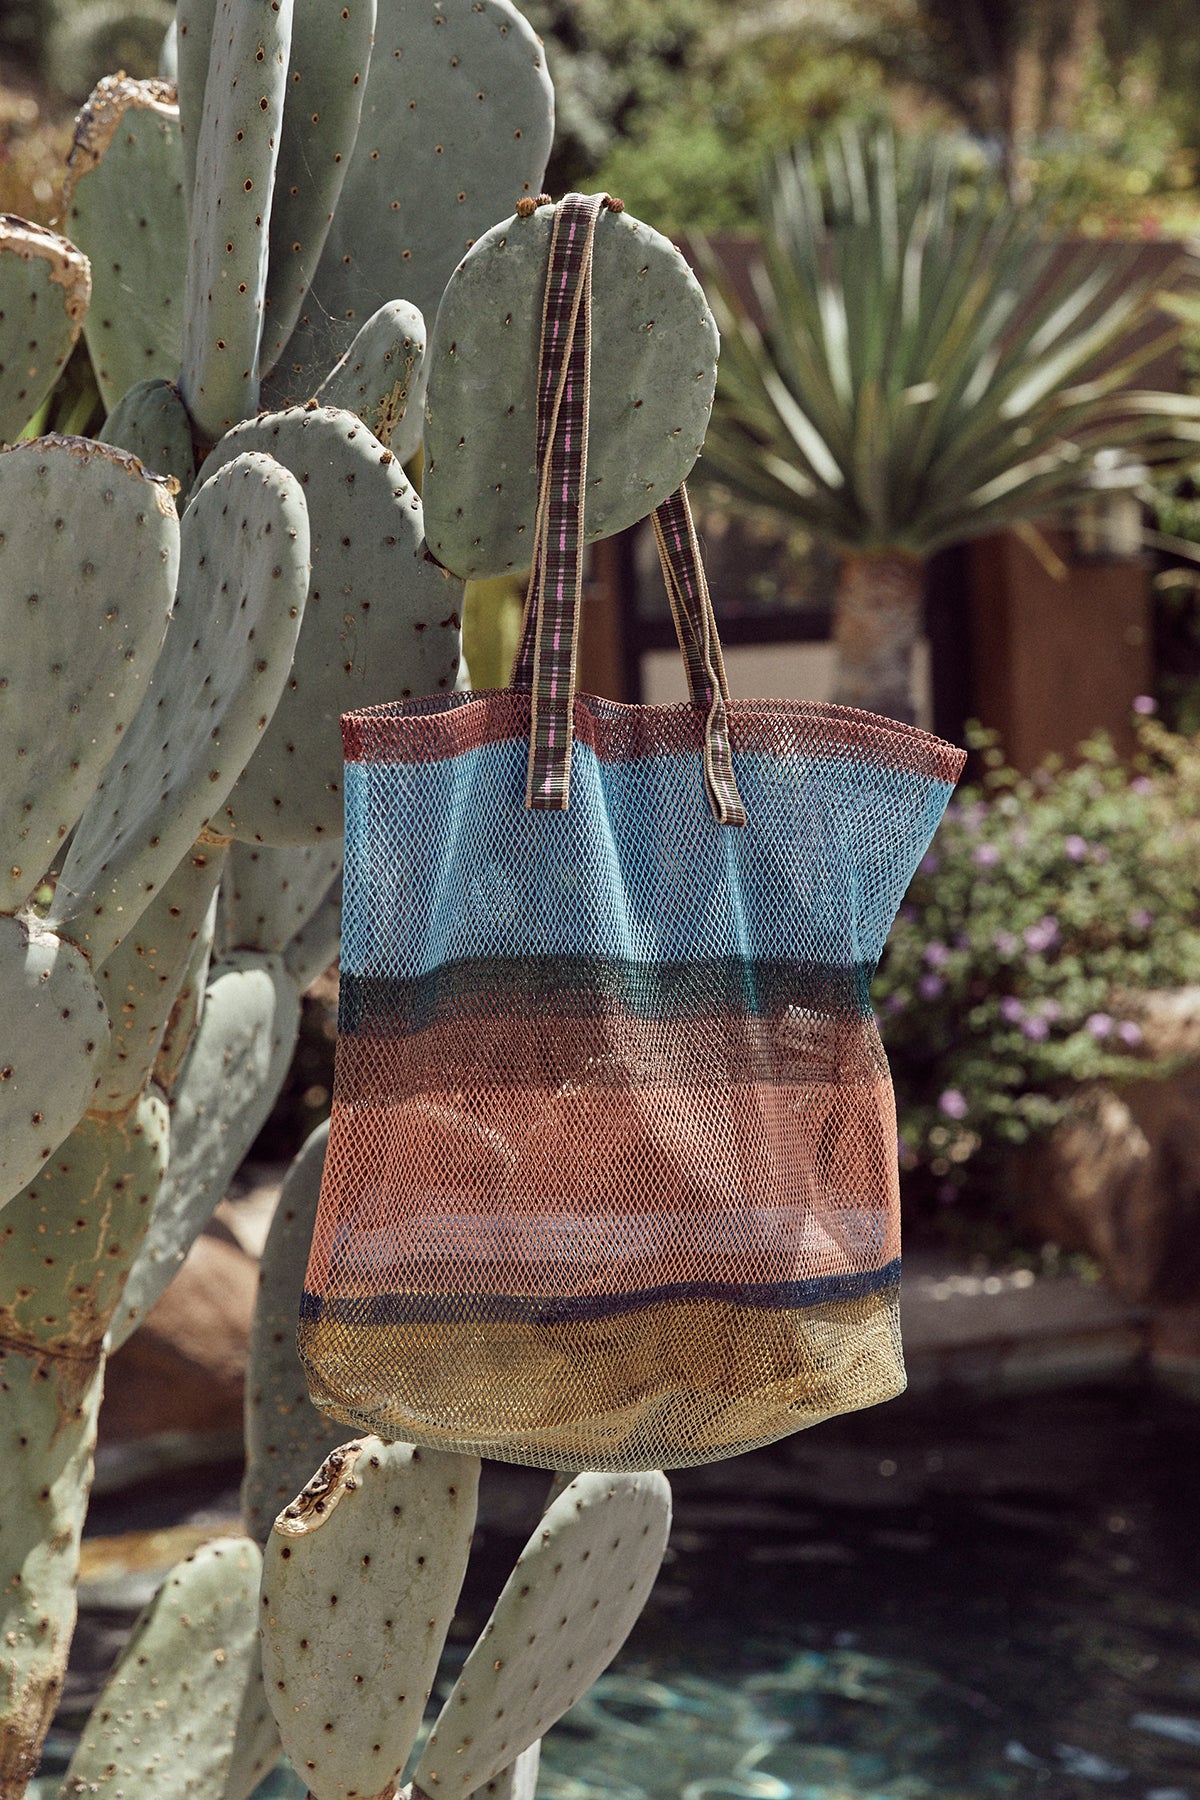   Large Striped Mesh Tote by Epice in Coral Hanging From Cactus. 